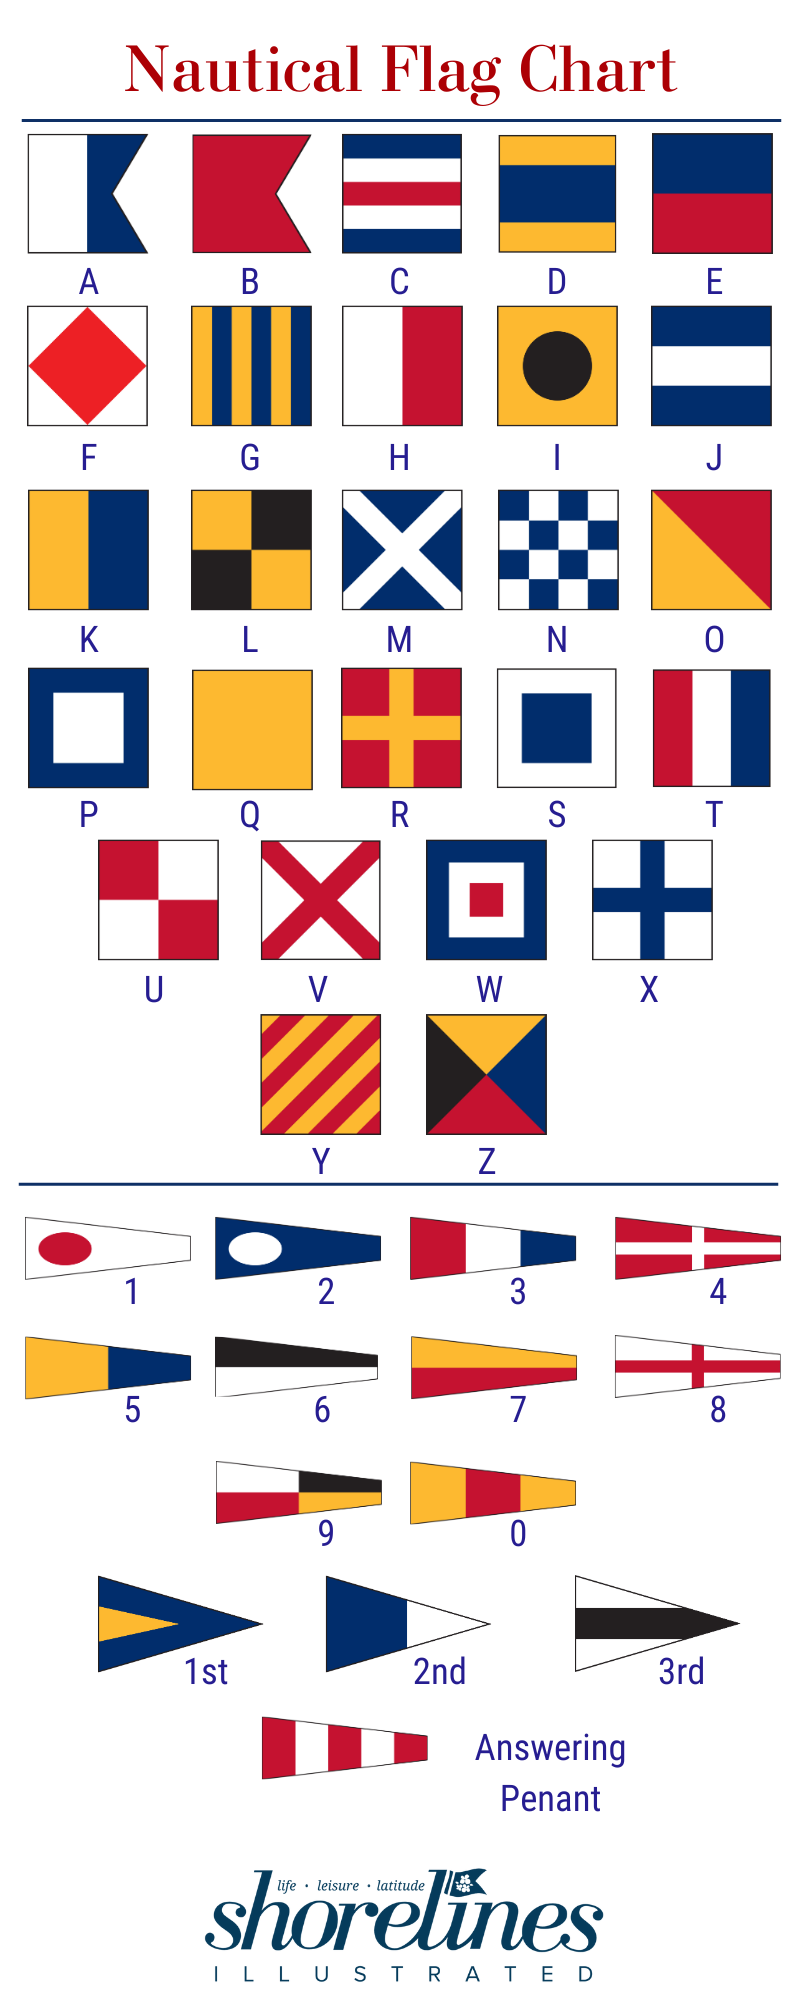 A Guide to Nautical Flags & Code Signals - Shorelines Illustrated